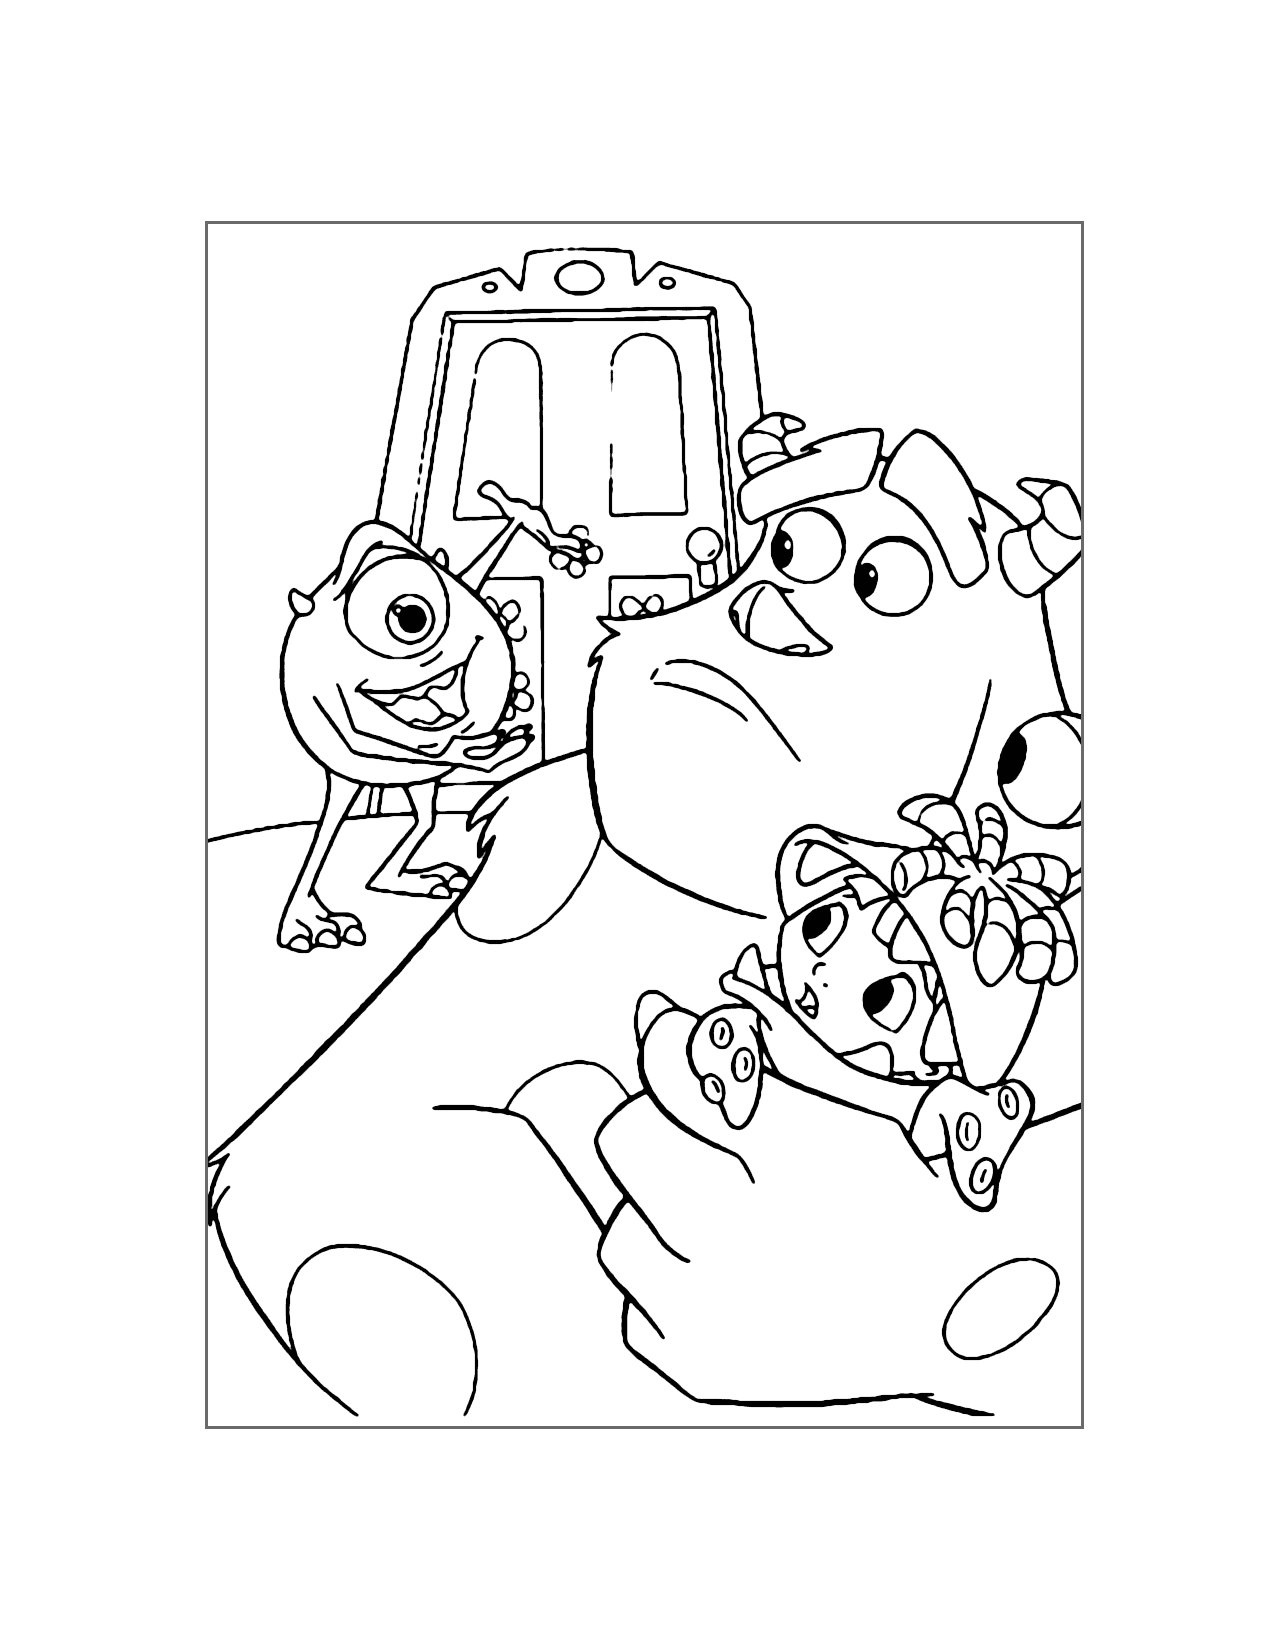 Put Boo Back Monsters Inc Coloring Page